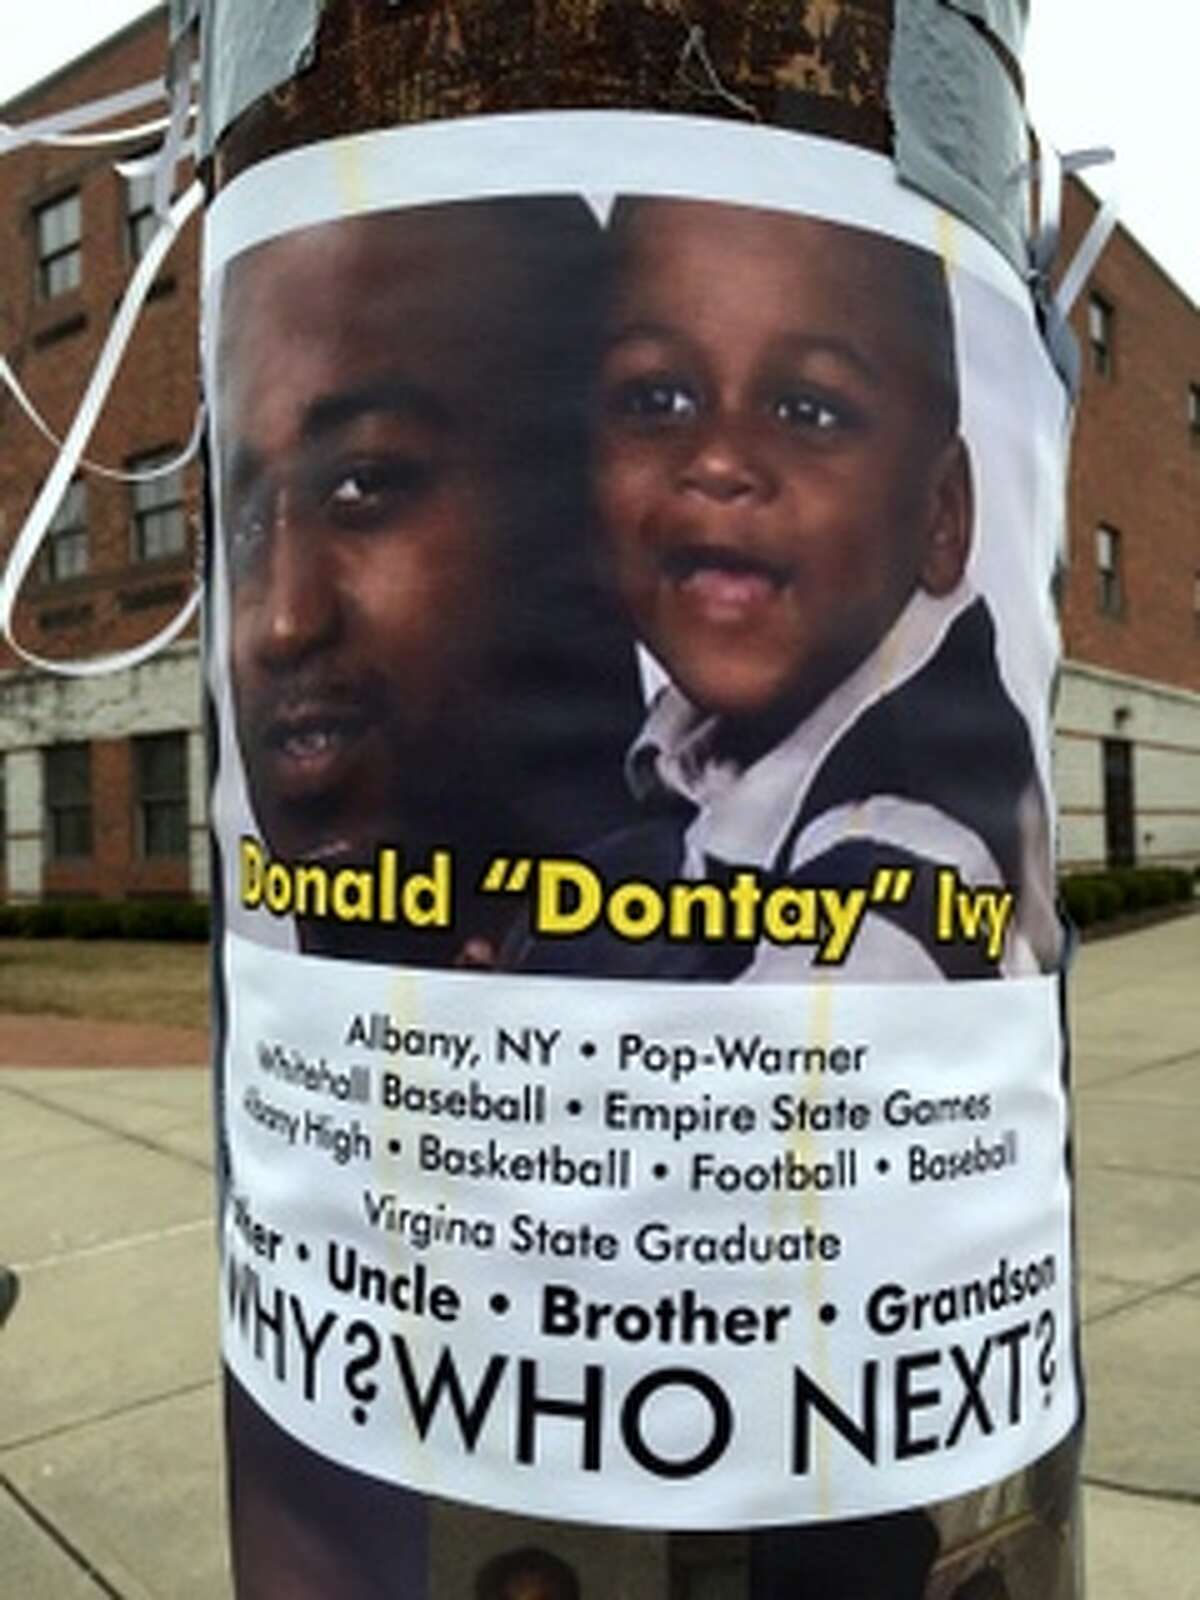 A memorial for Donald "Dontay" Ivy on April 9, 2015, near where he died in police custody on Lark and Second streets in Albany. (Paul Grondahl/Times Union)